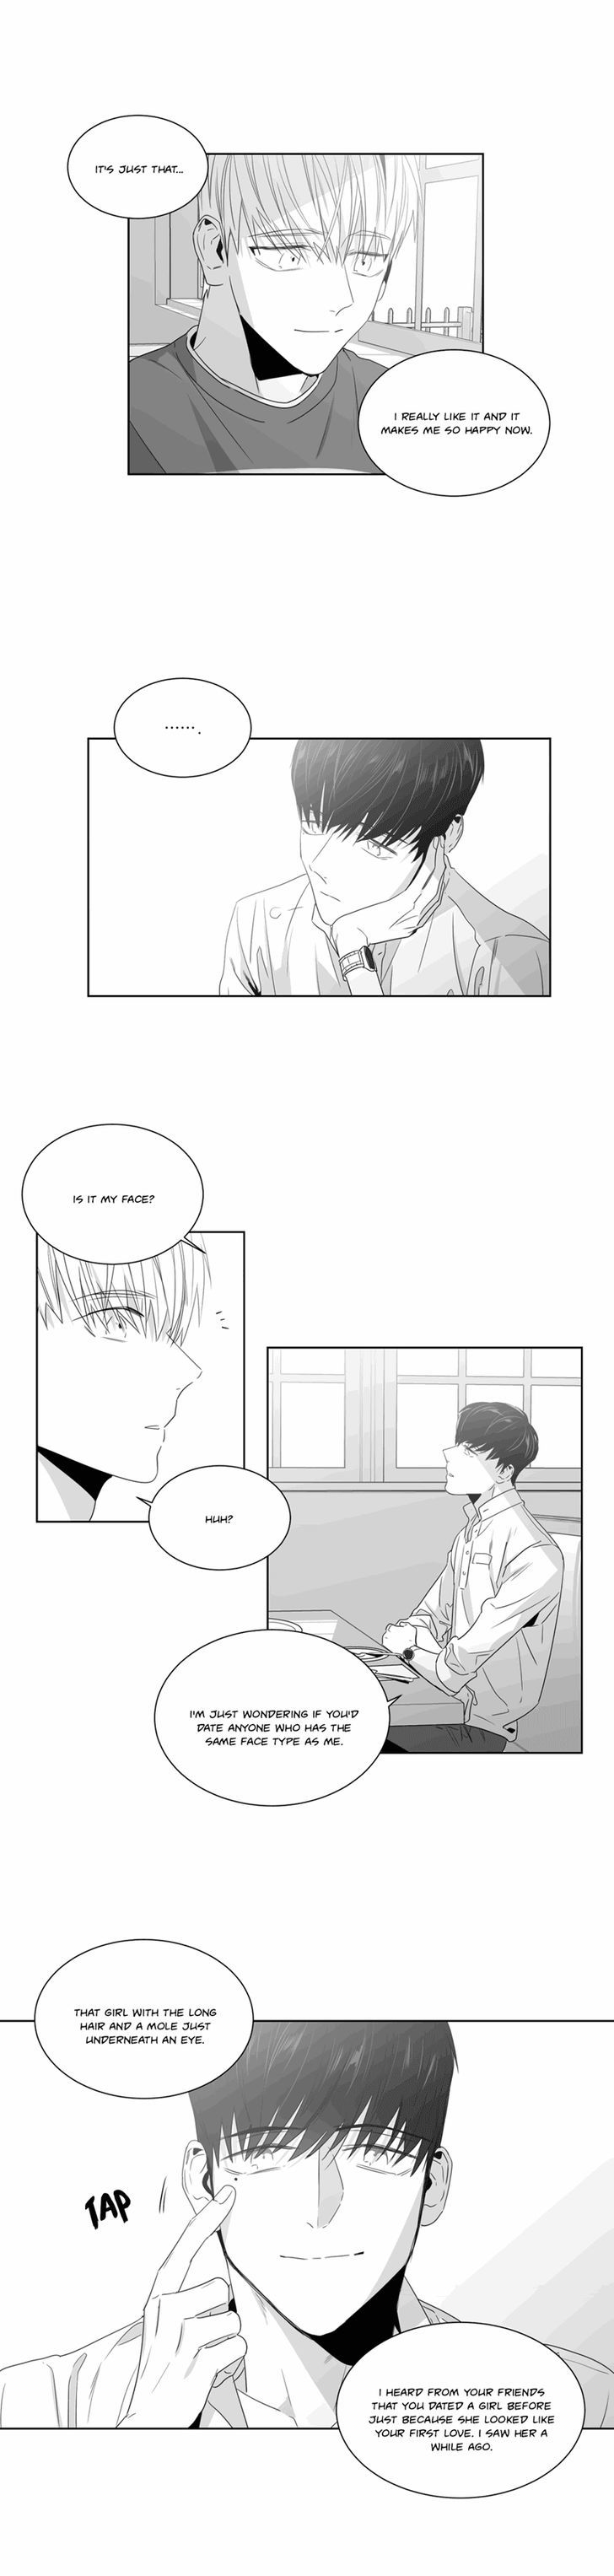 Lover Boy (Lezhin) Chapter 038 page 11